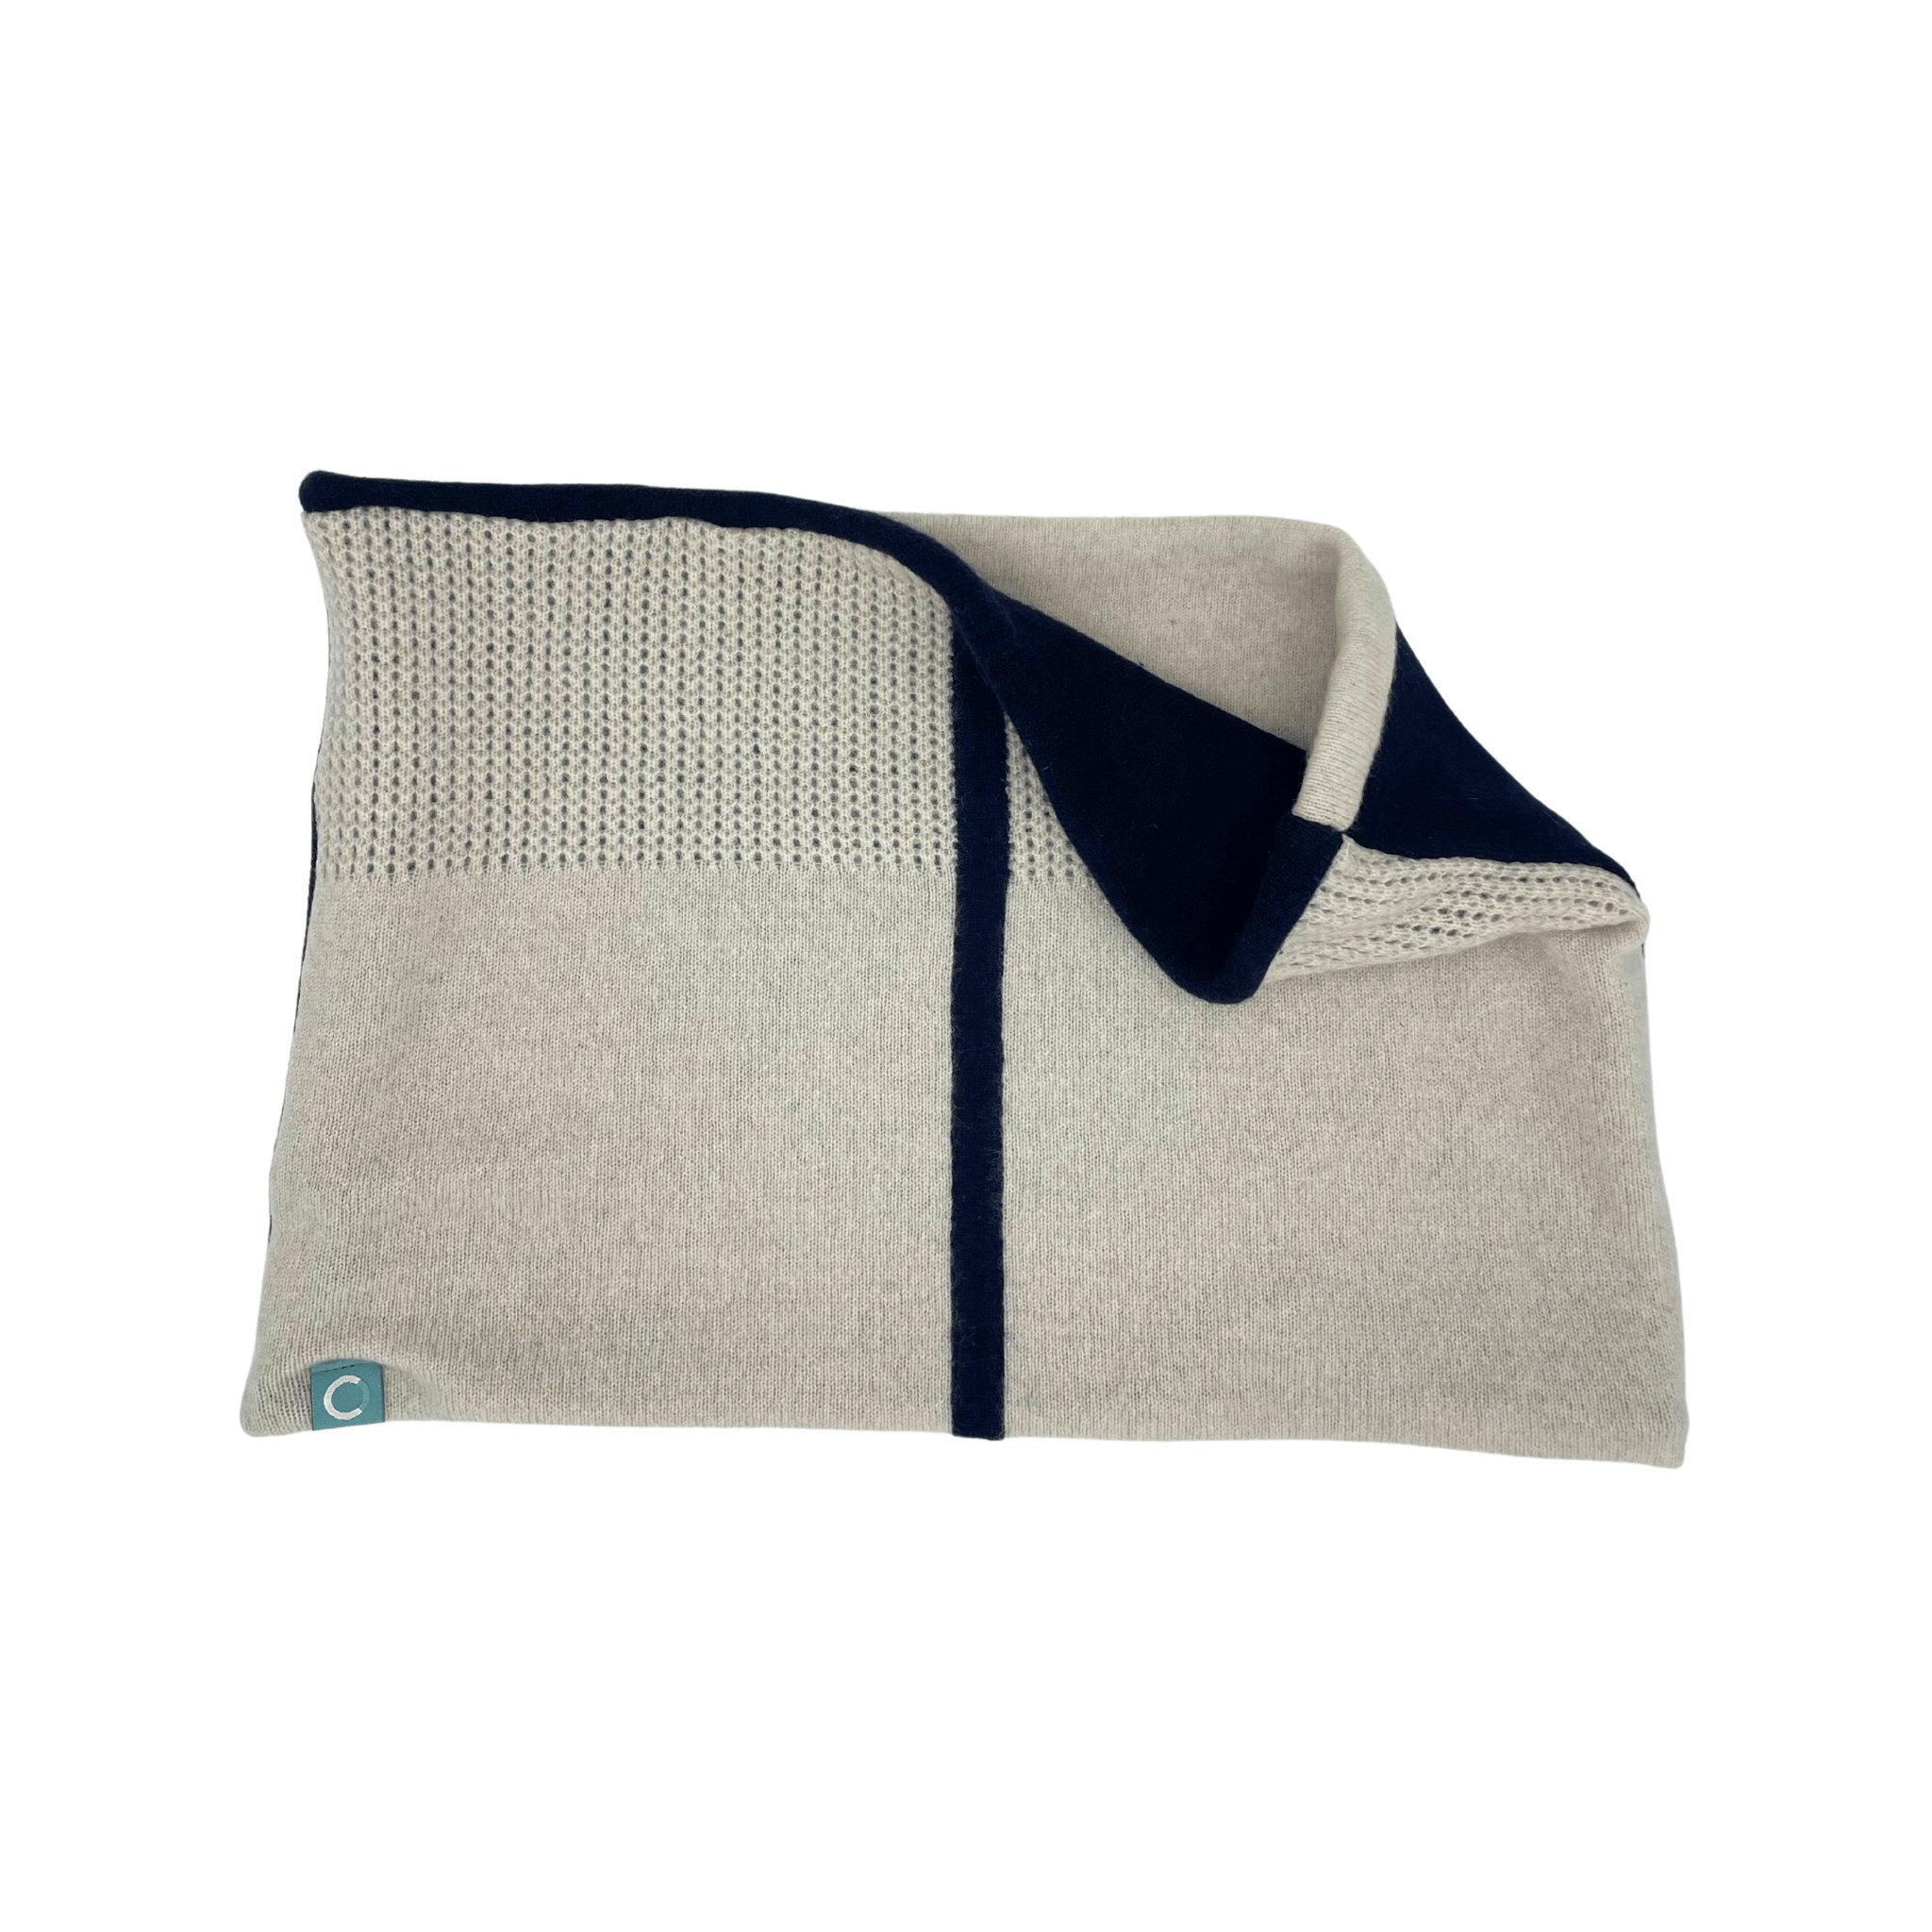 Recycled Neckwarmers | Large - Beige & Dark Navy - Cashmere Circle